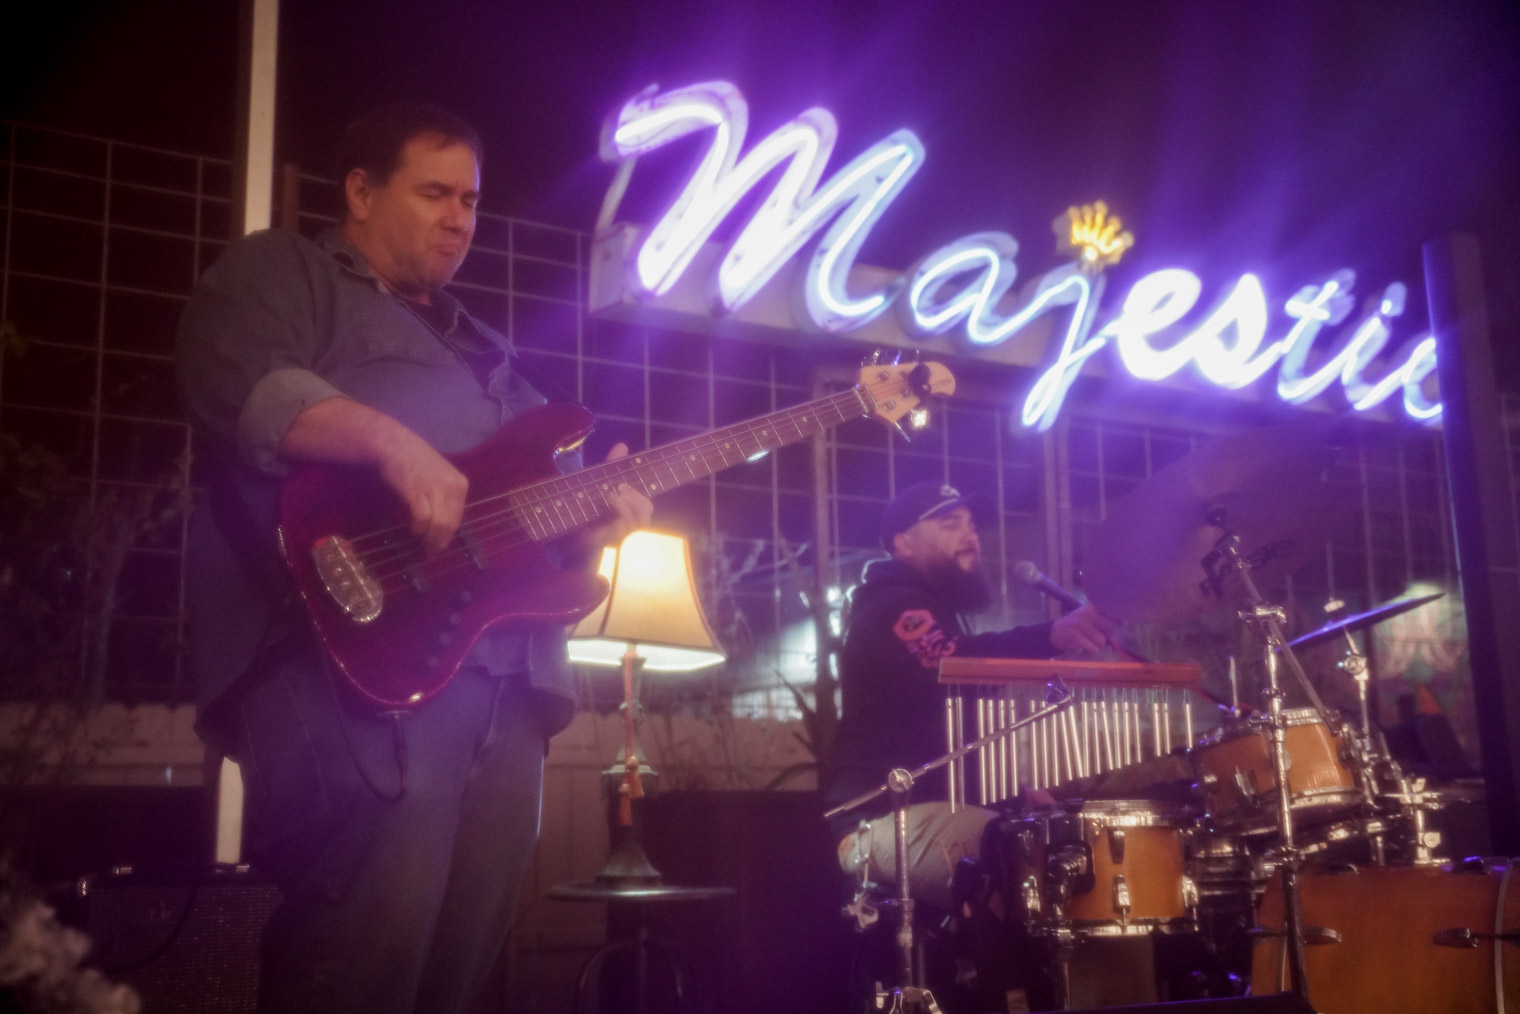 A band on stage in front of a neon sign